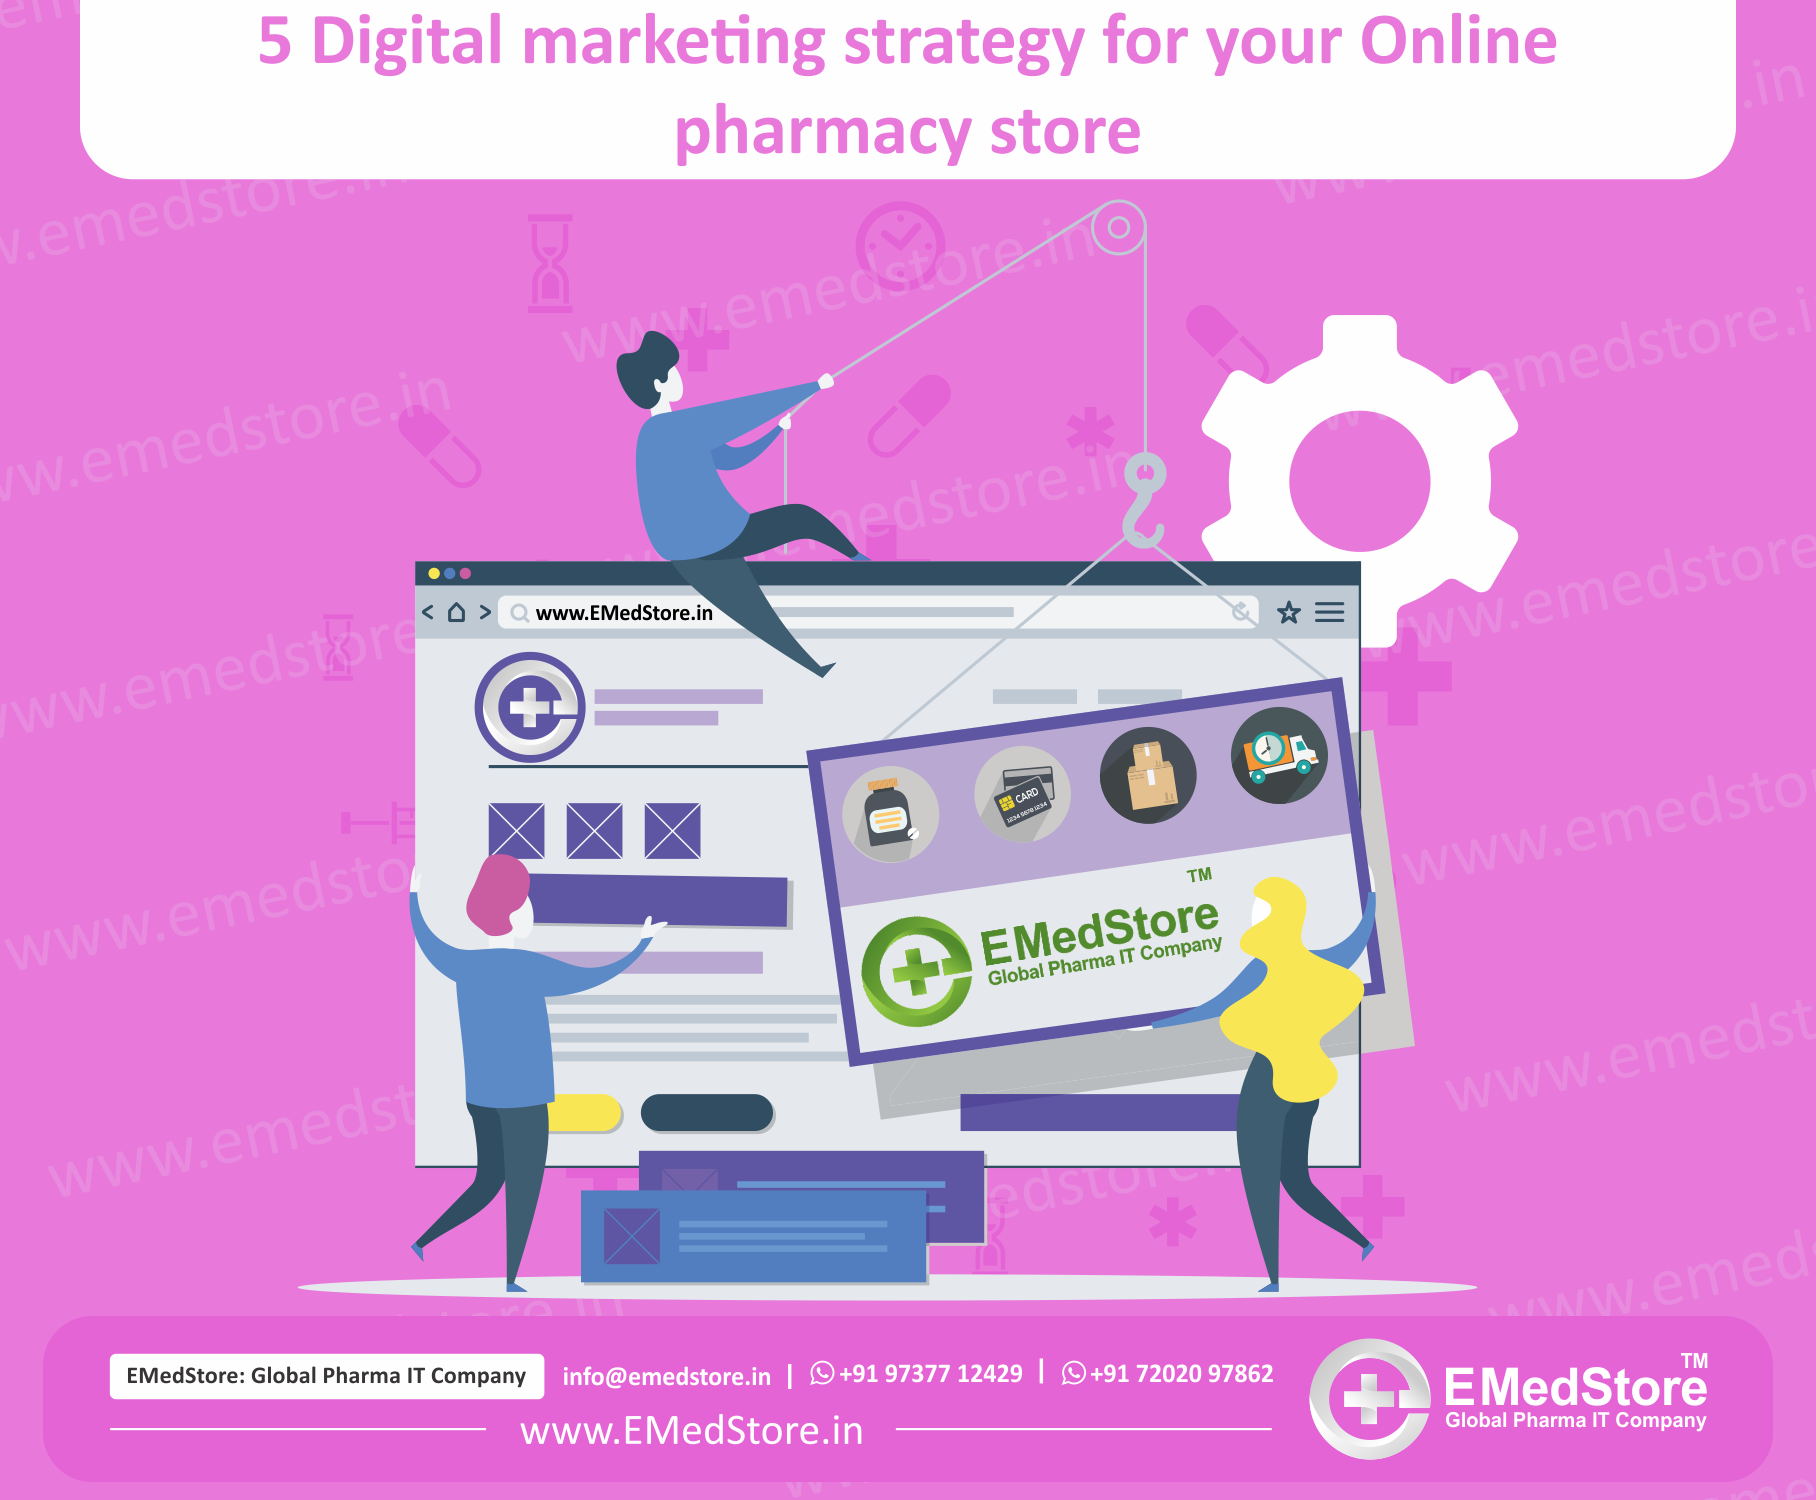 5 Digital marketing strategy for your Online pharmacy store